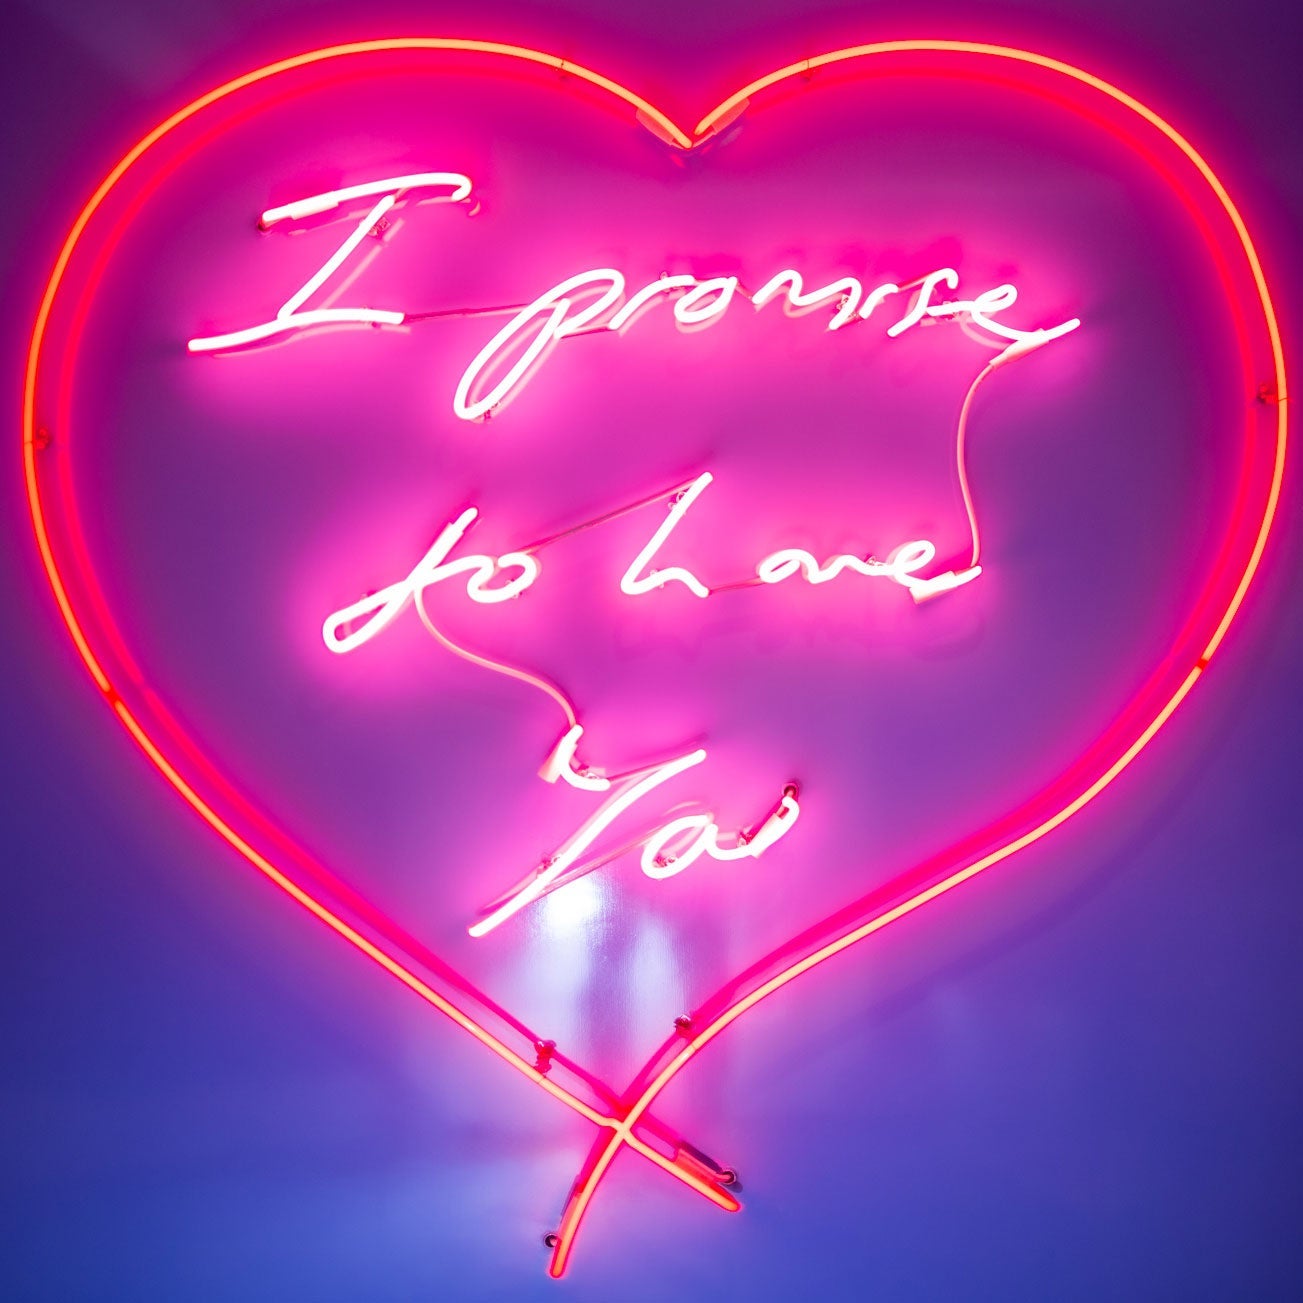 A neon piece of artwork that says "I promise to love you" inside a heart.